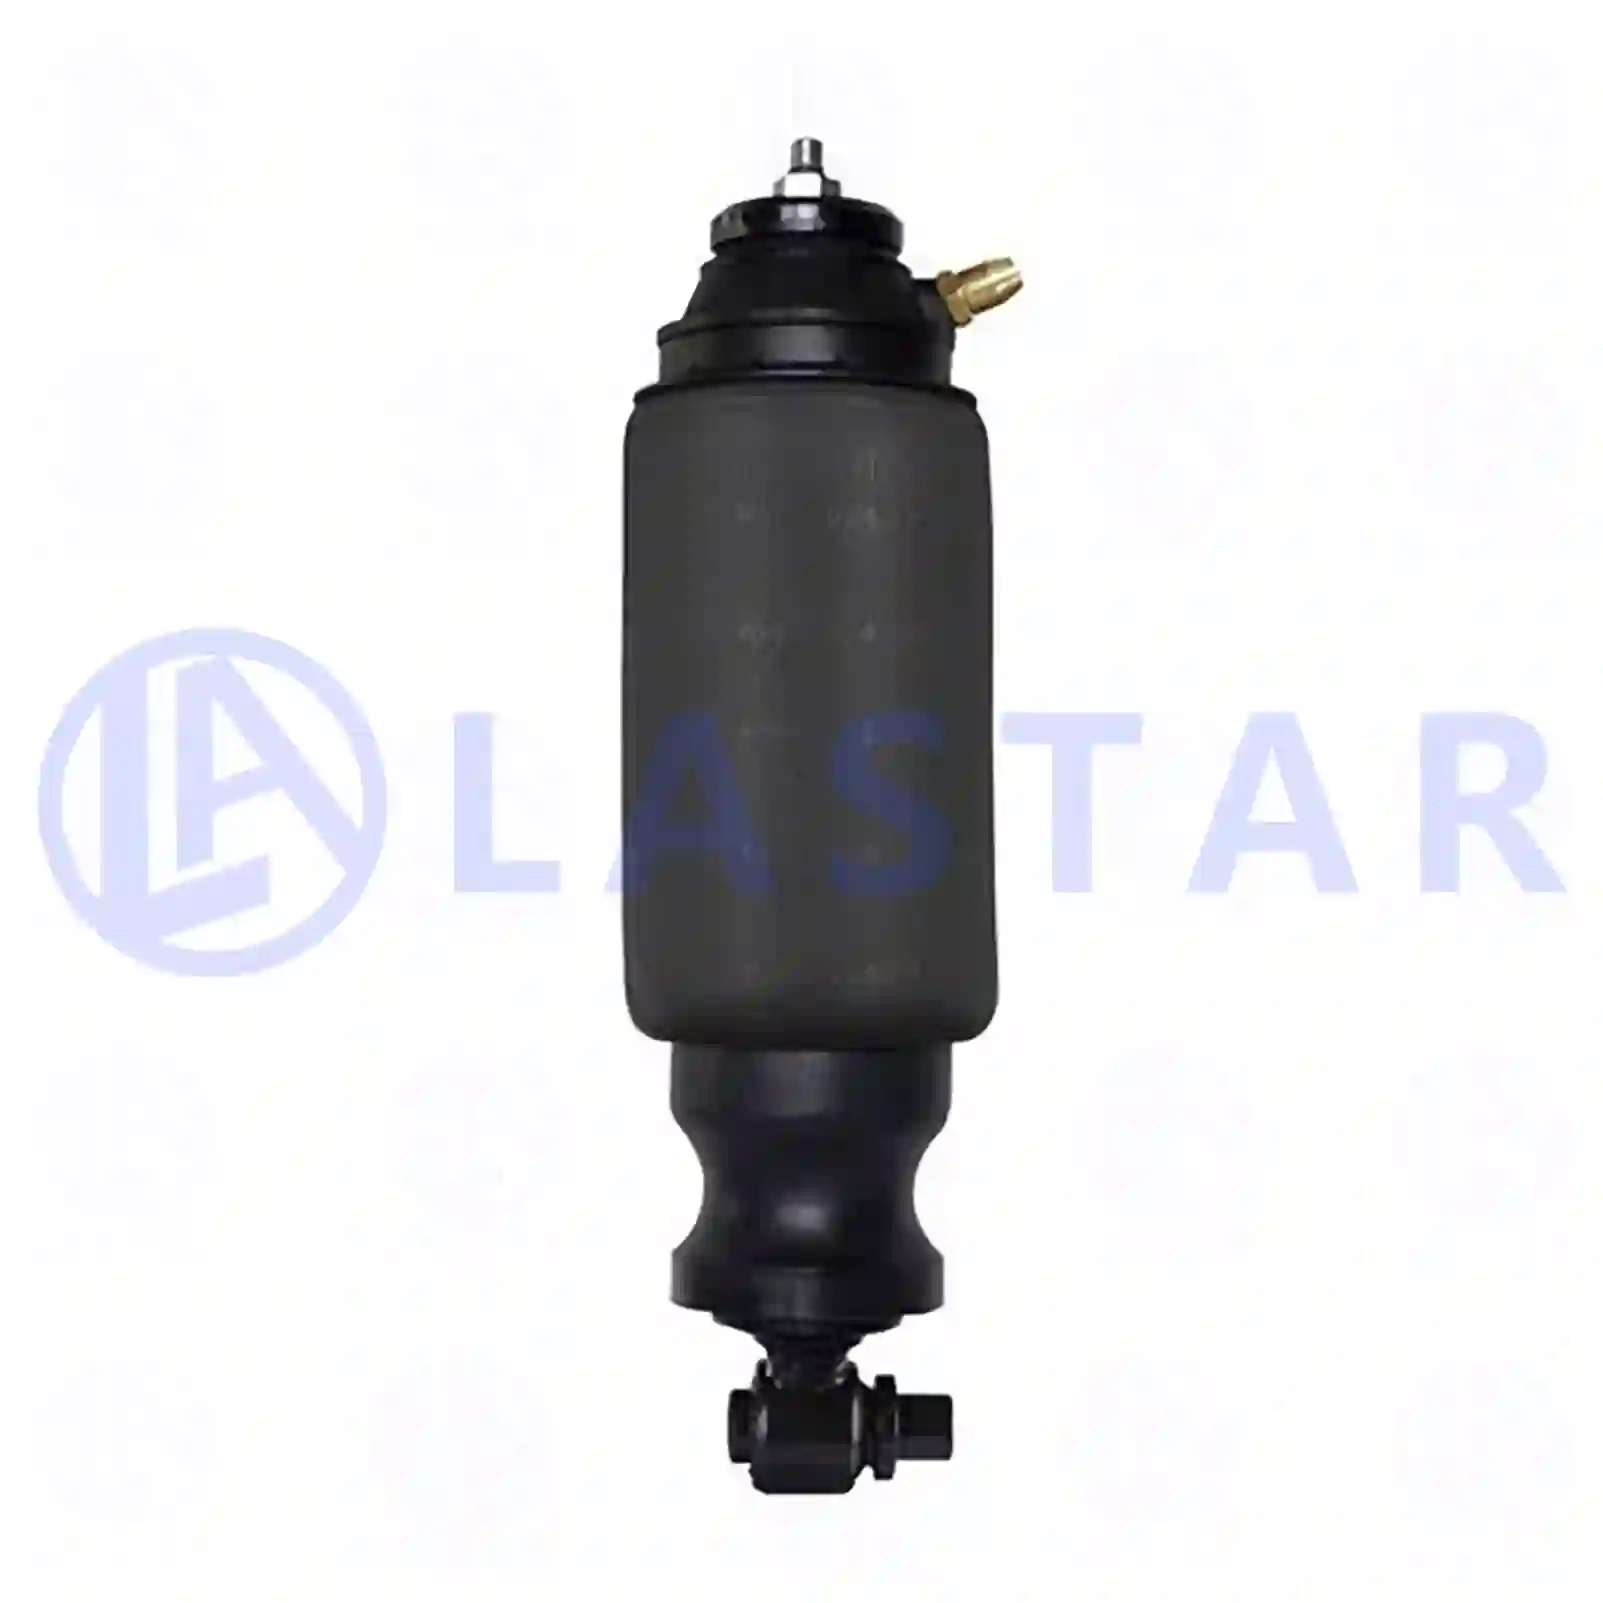 Cabin shock absorber, with air bellow, 77735735, 20399204, 20453258, 20889136, 21111942, 3198837 ||  77735735 Lastar Spare Part | Truck Spare Parts, Auotomotive Spare Parts Cabin shock absorber, with air bellow, 77735735, 20399204, 20453258, 20889136, 21111942, 3198837 ||  77735735 Lastar Spare Part | Truck Spare Parts, Auotomotive Spare Parts